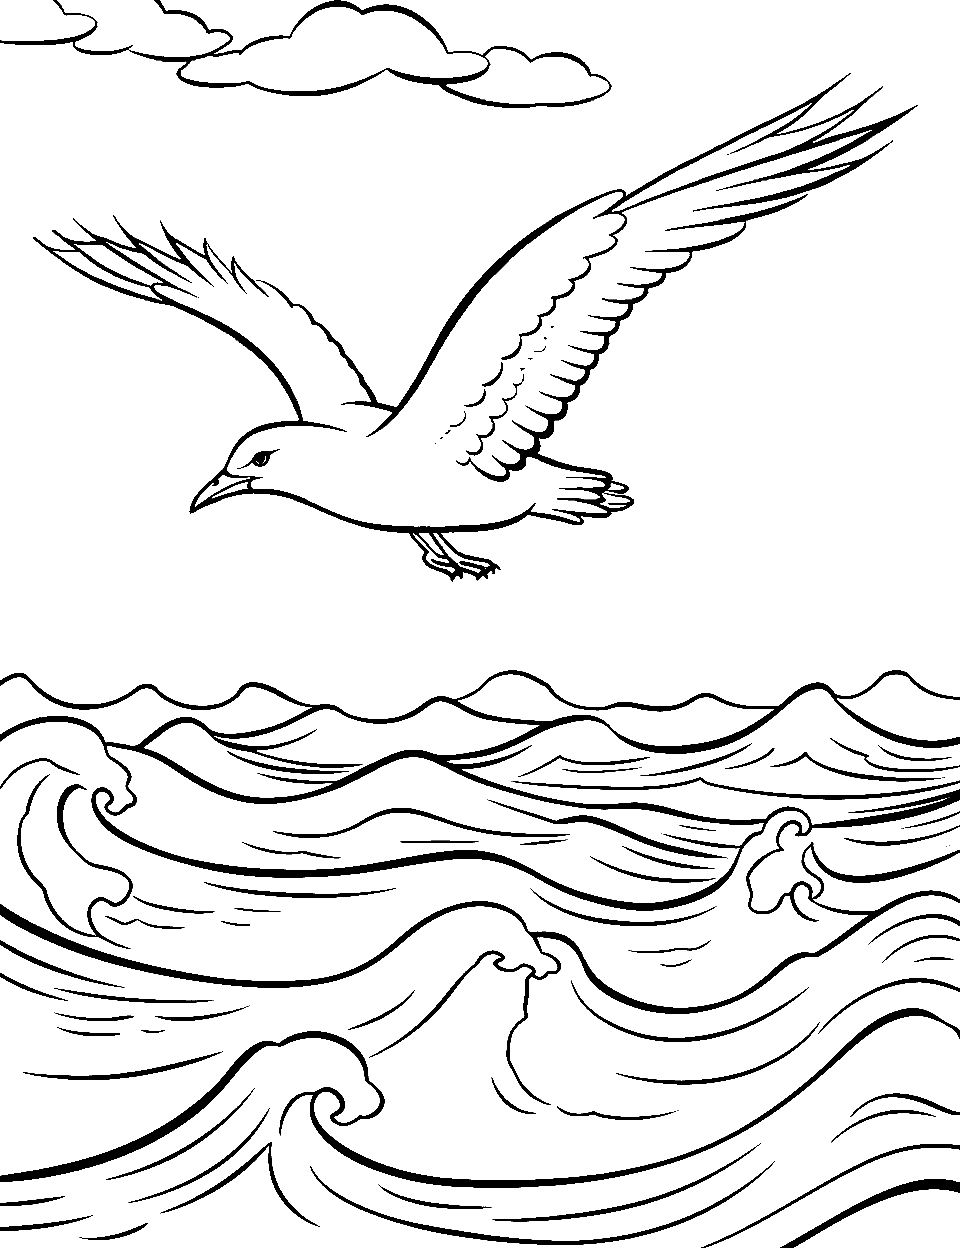 Seagull Soaring Above Waves Ocean Coloring Page - A seagull flying high above the ocean waves.